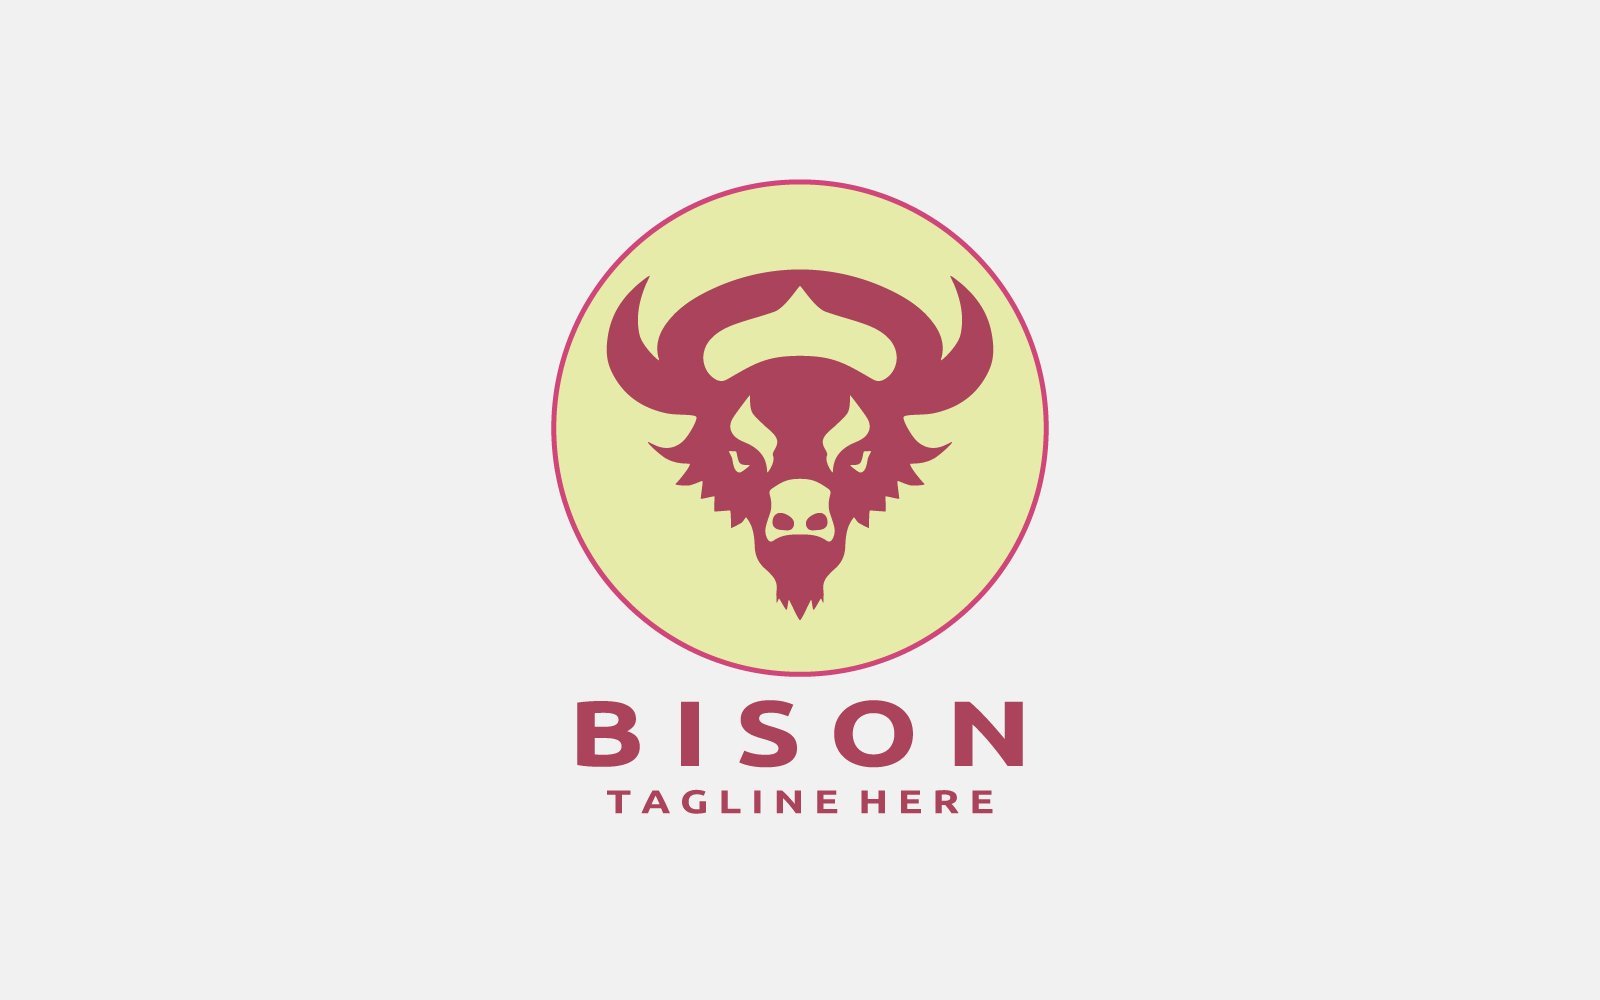 Template #381893 Logo Bison Webdesign Template - Logo template Preview